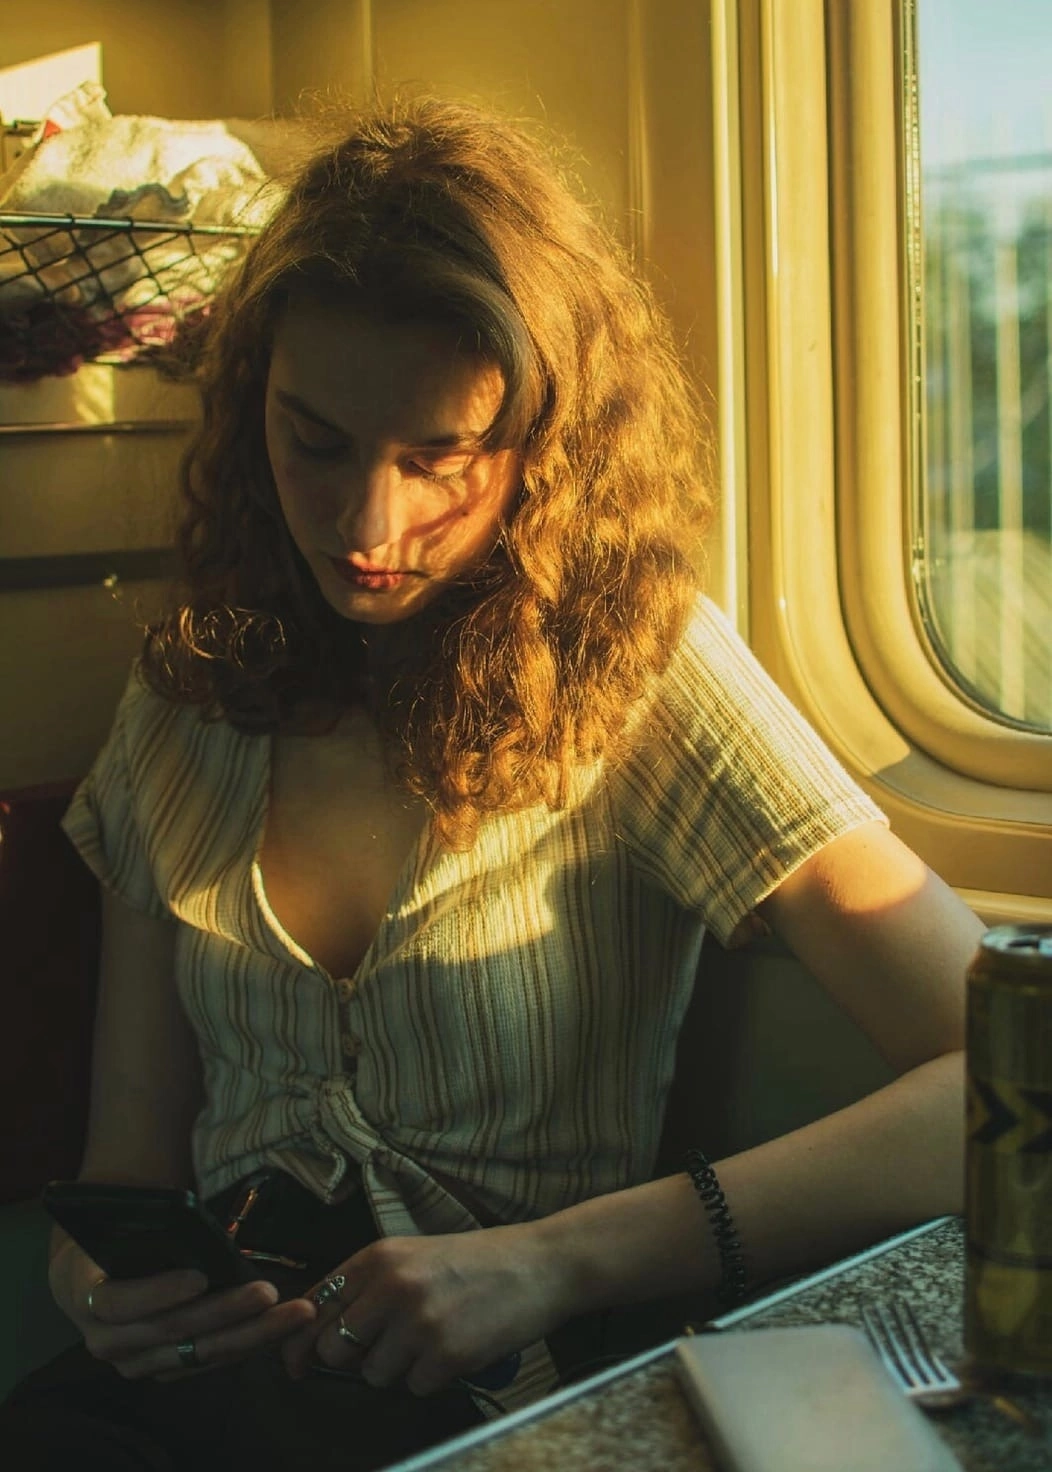 She goes to St. Petersburg to submit documents to the Polytechnic and doesn’t even know how beautiful she is in this setting sun - The sun, Girls, The photo, Sunset, A train